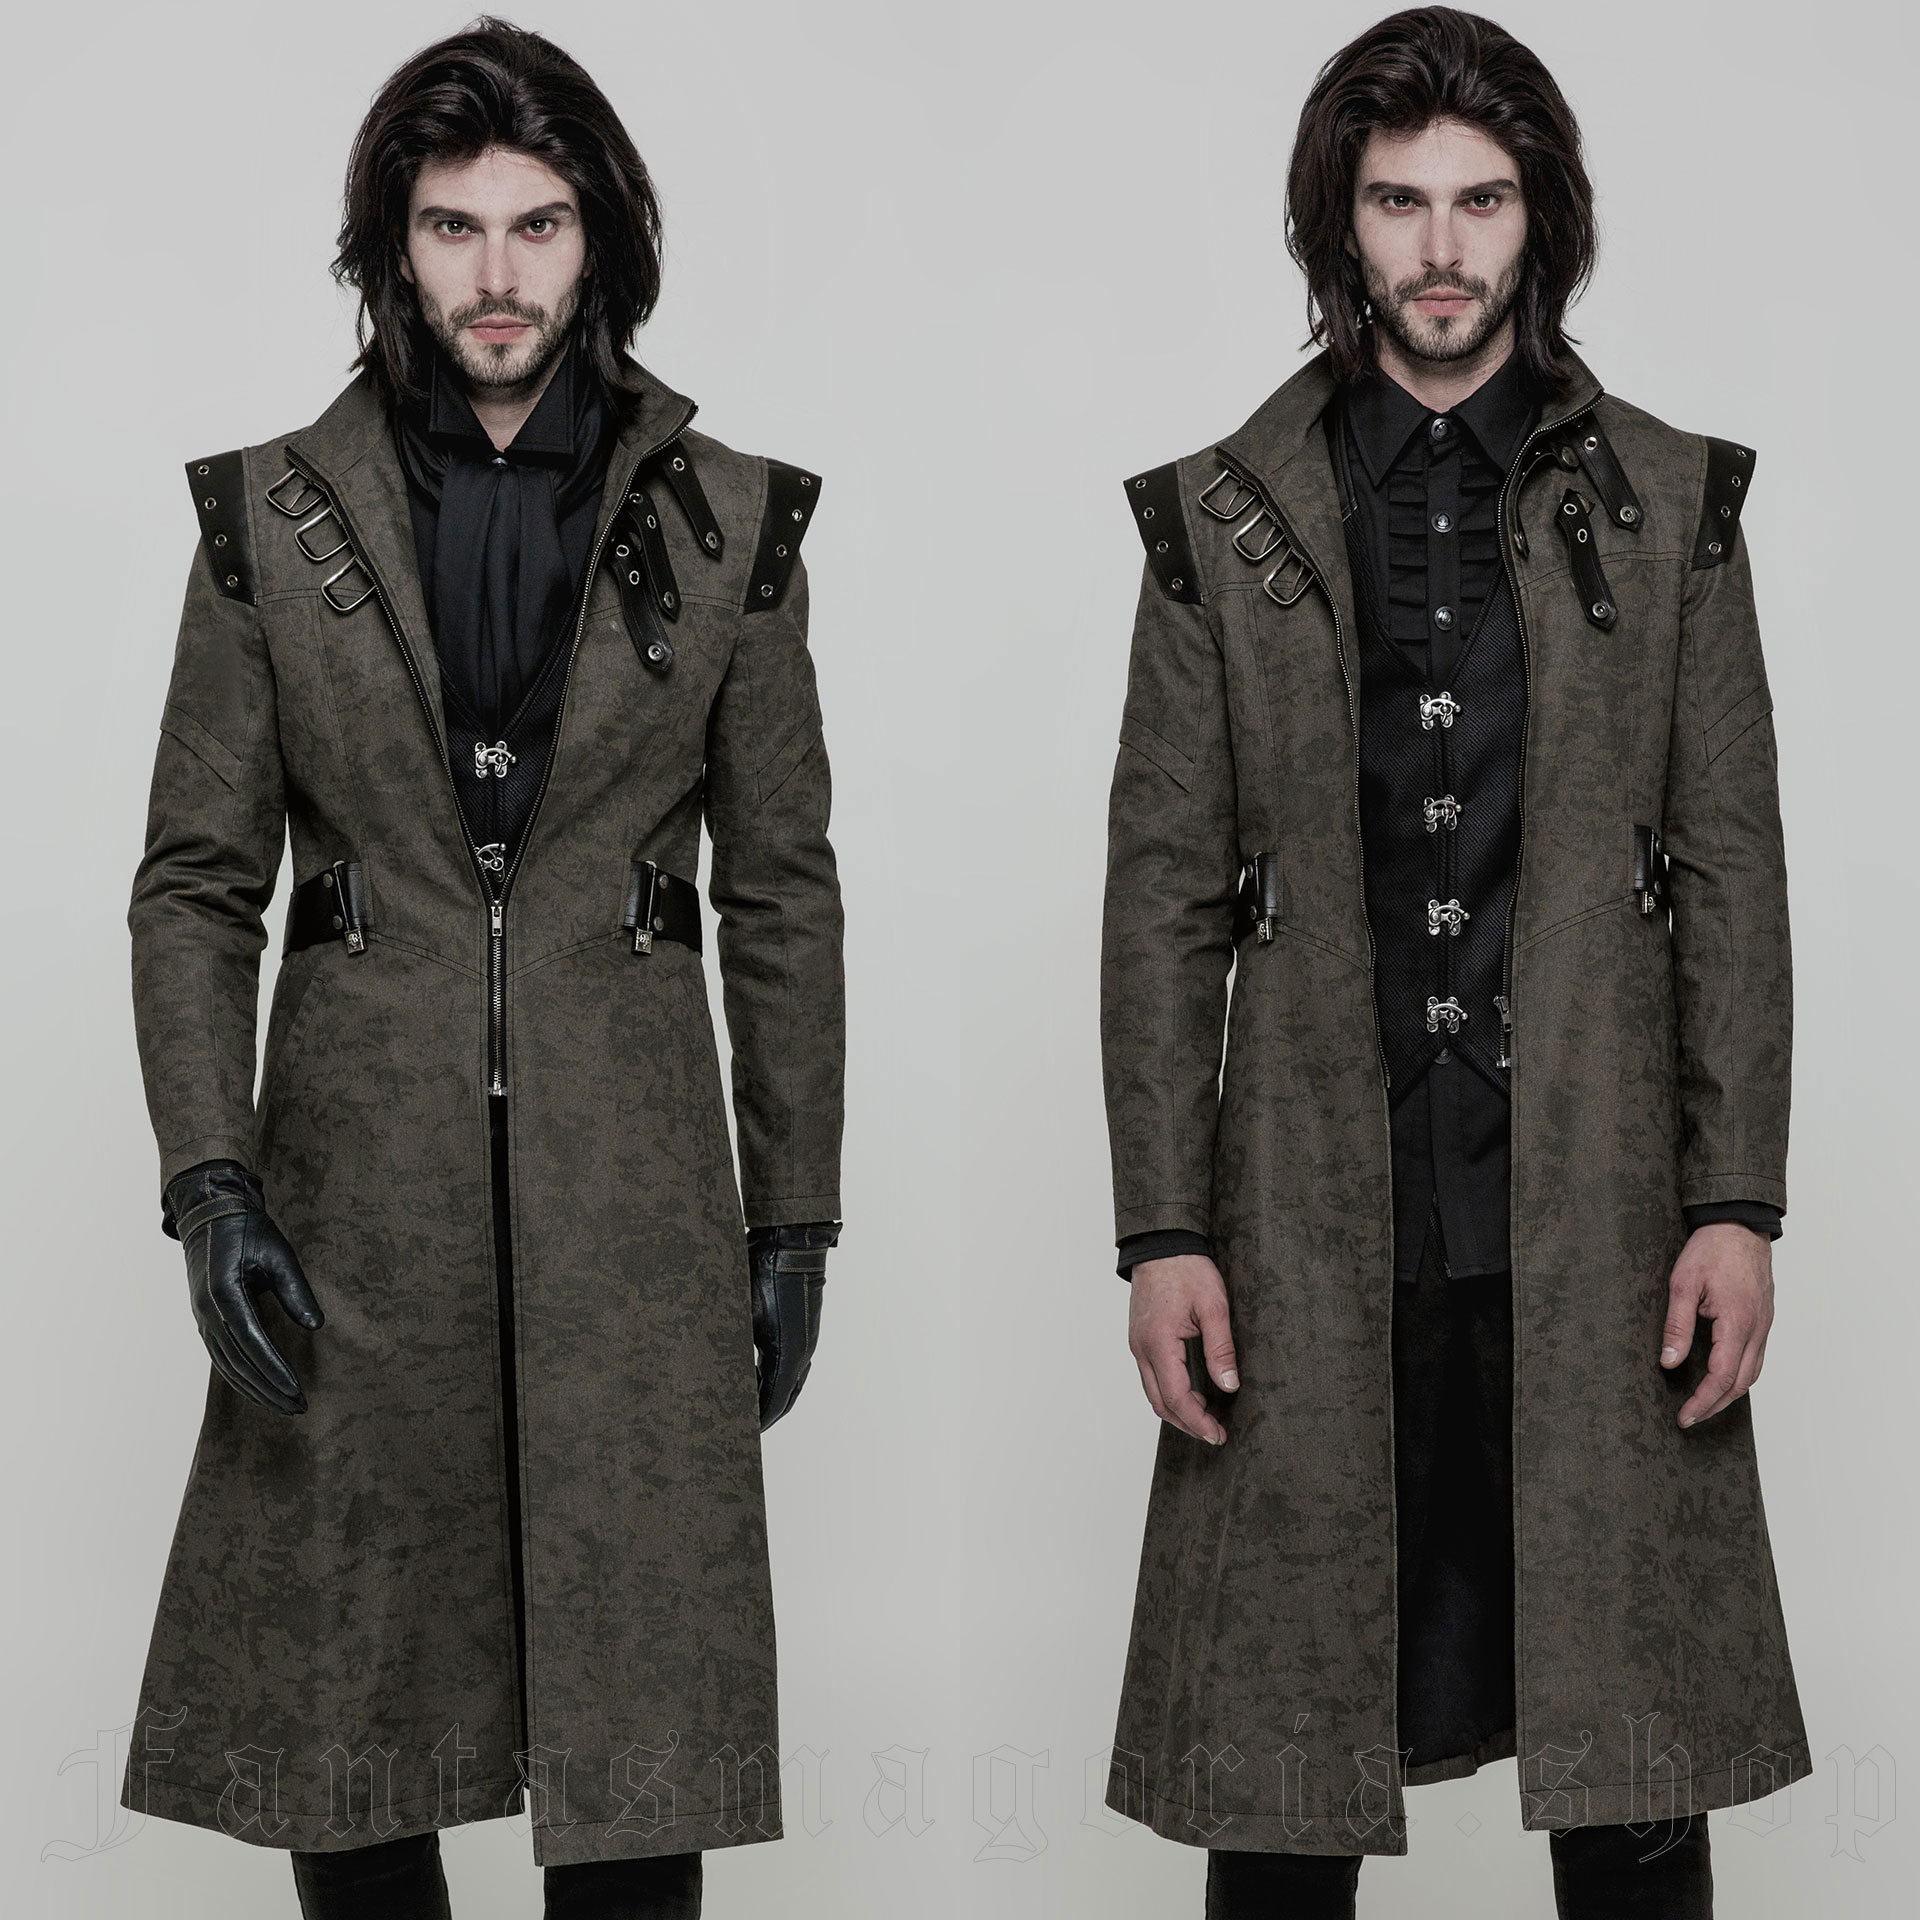 The Smog Coat by Punk Rave brand